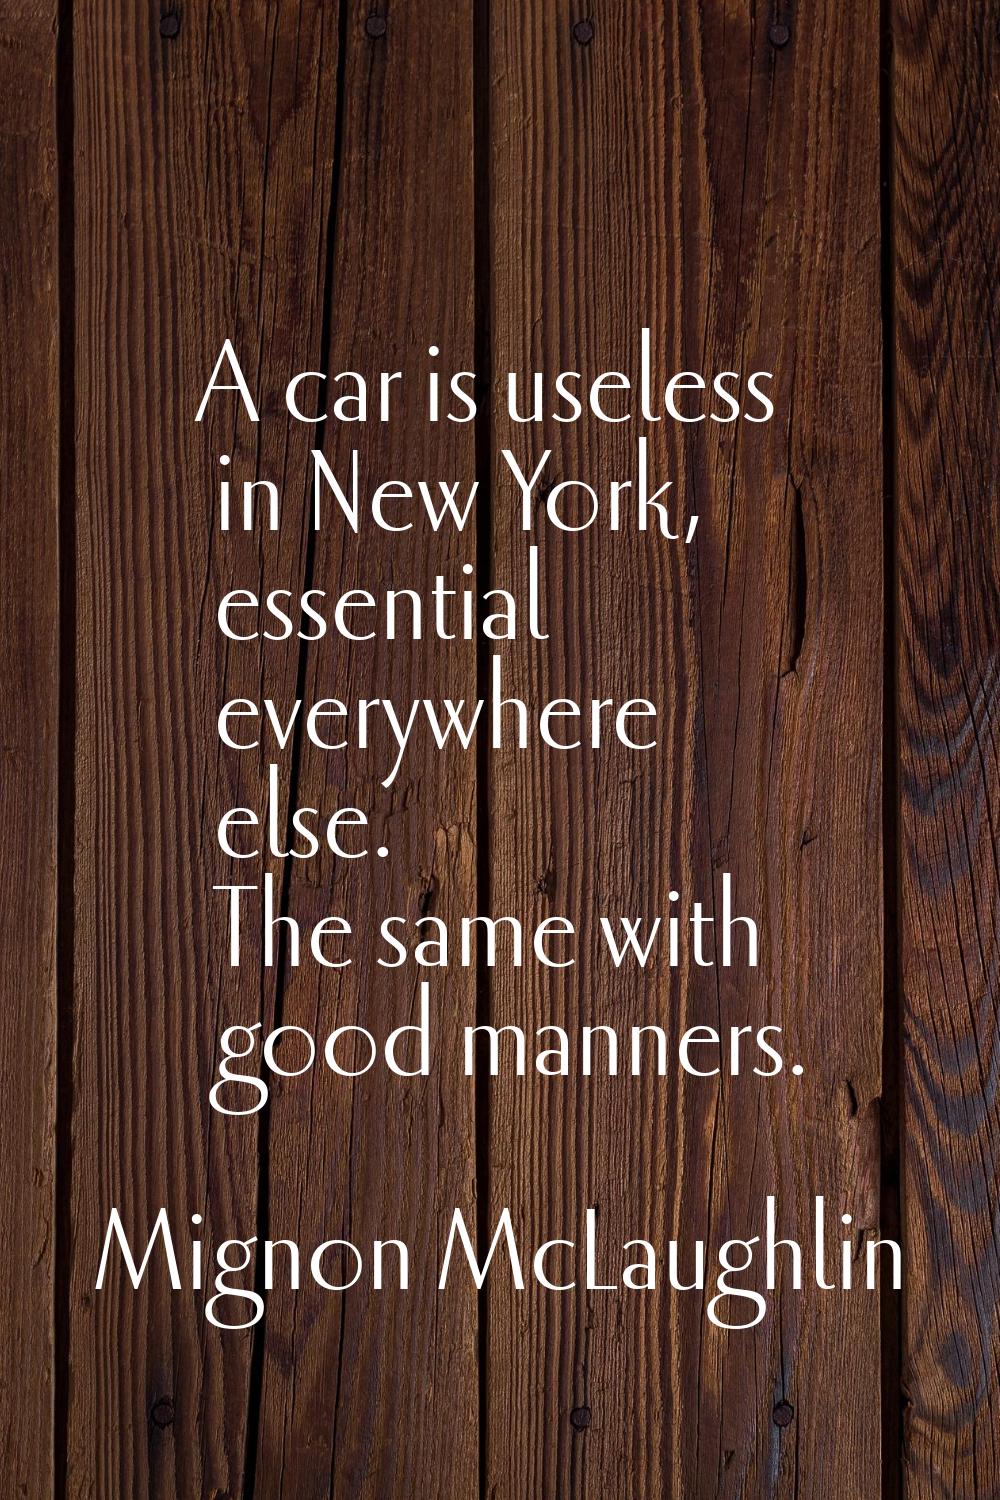 A car is useless in New York, essential everywhere else. The same with good manners.